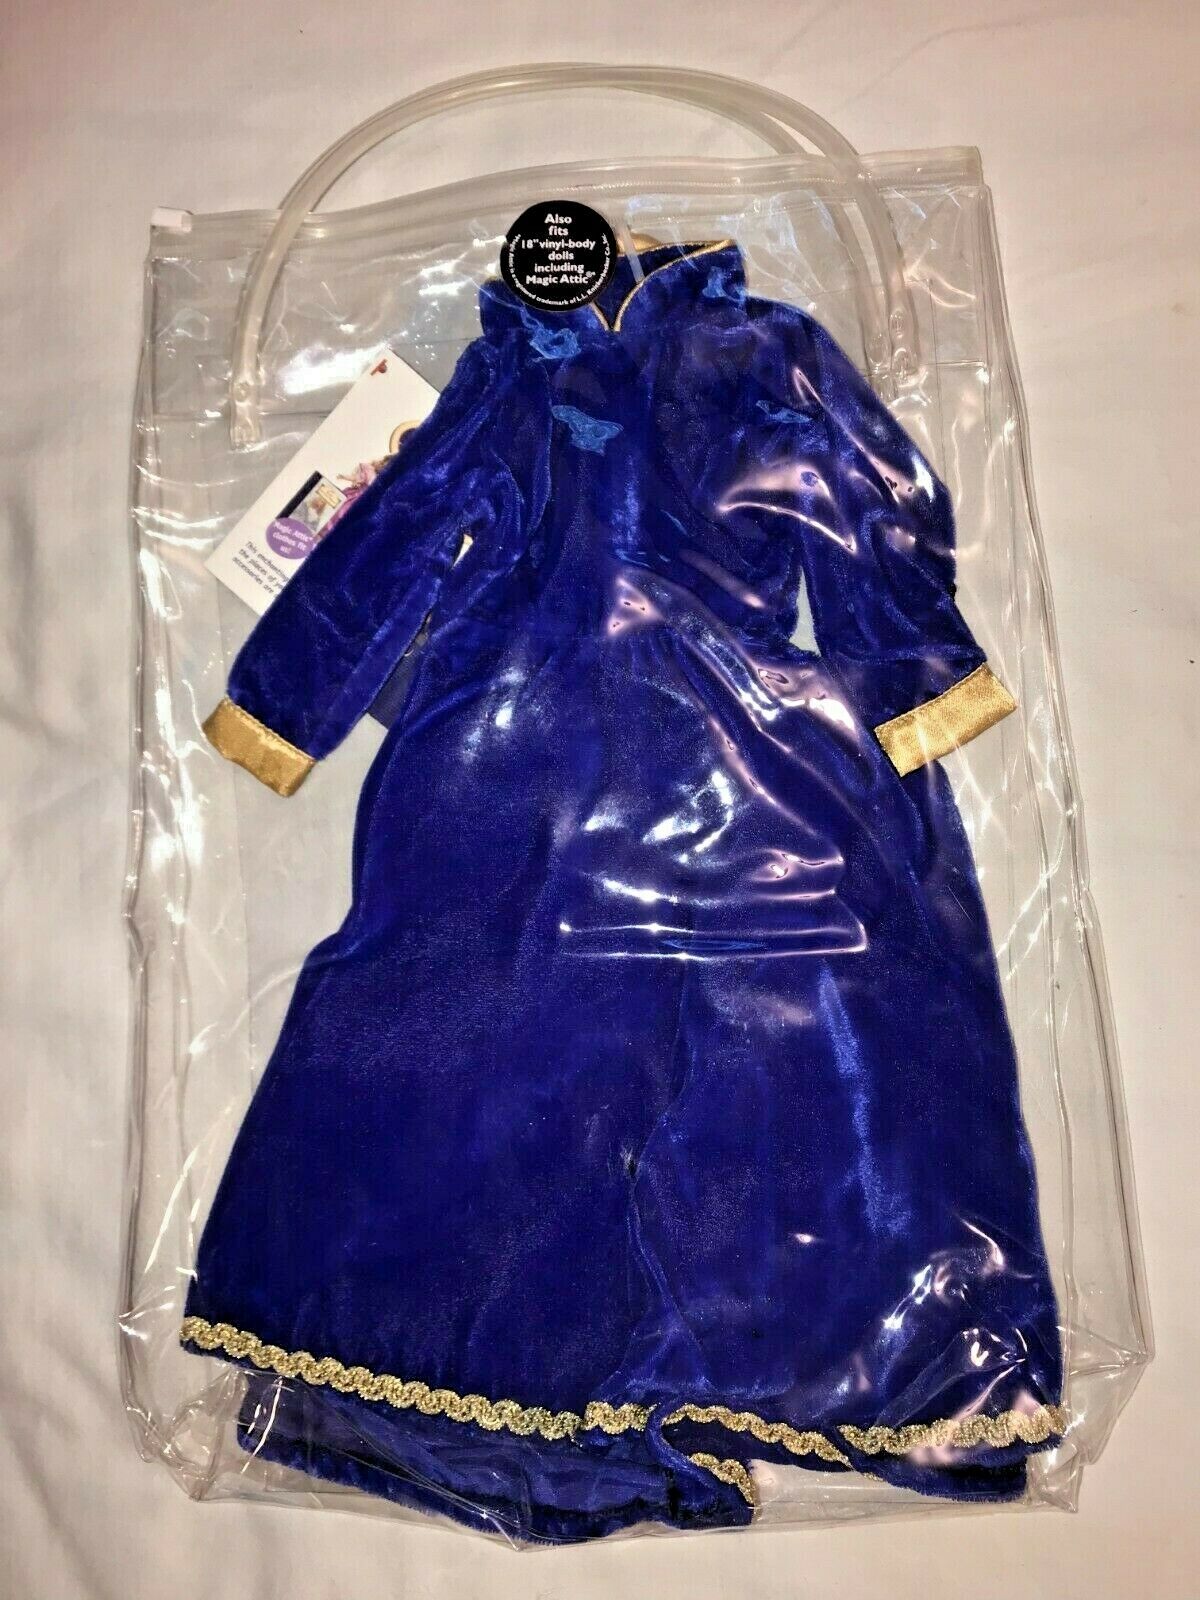 Kat's Blue Velvet Gown By Stardust Classics - Mint In Package